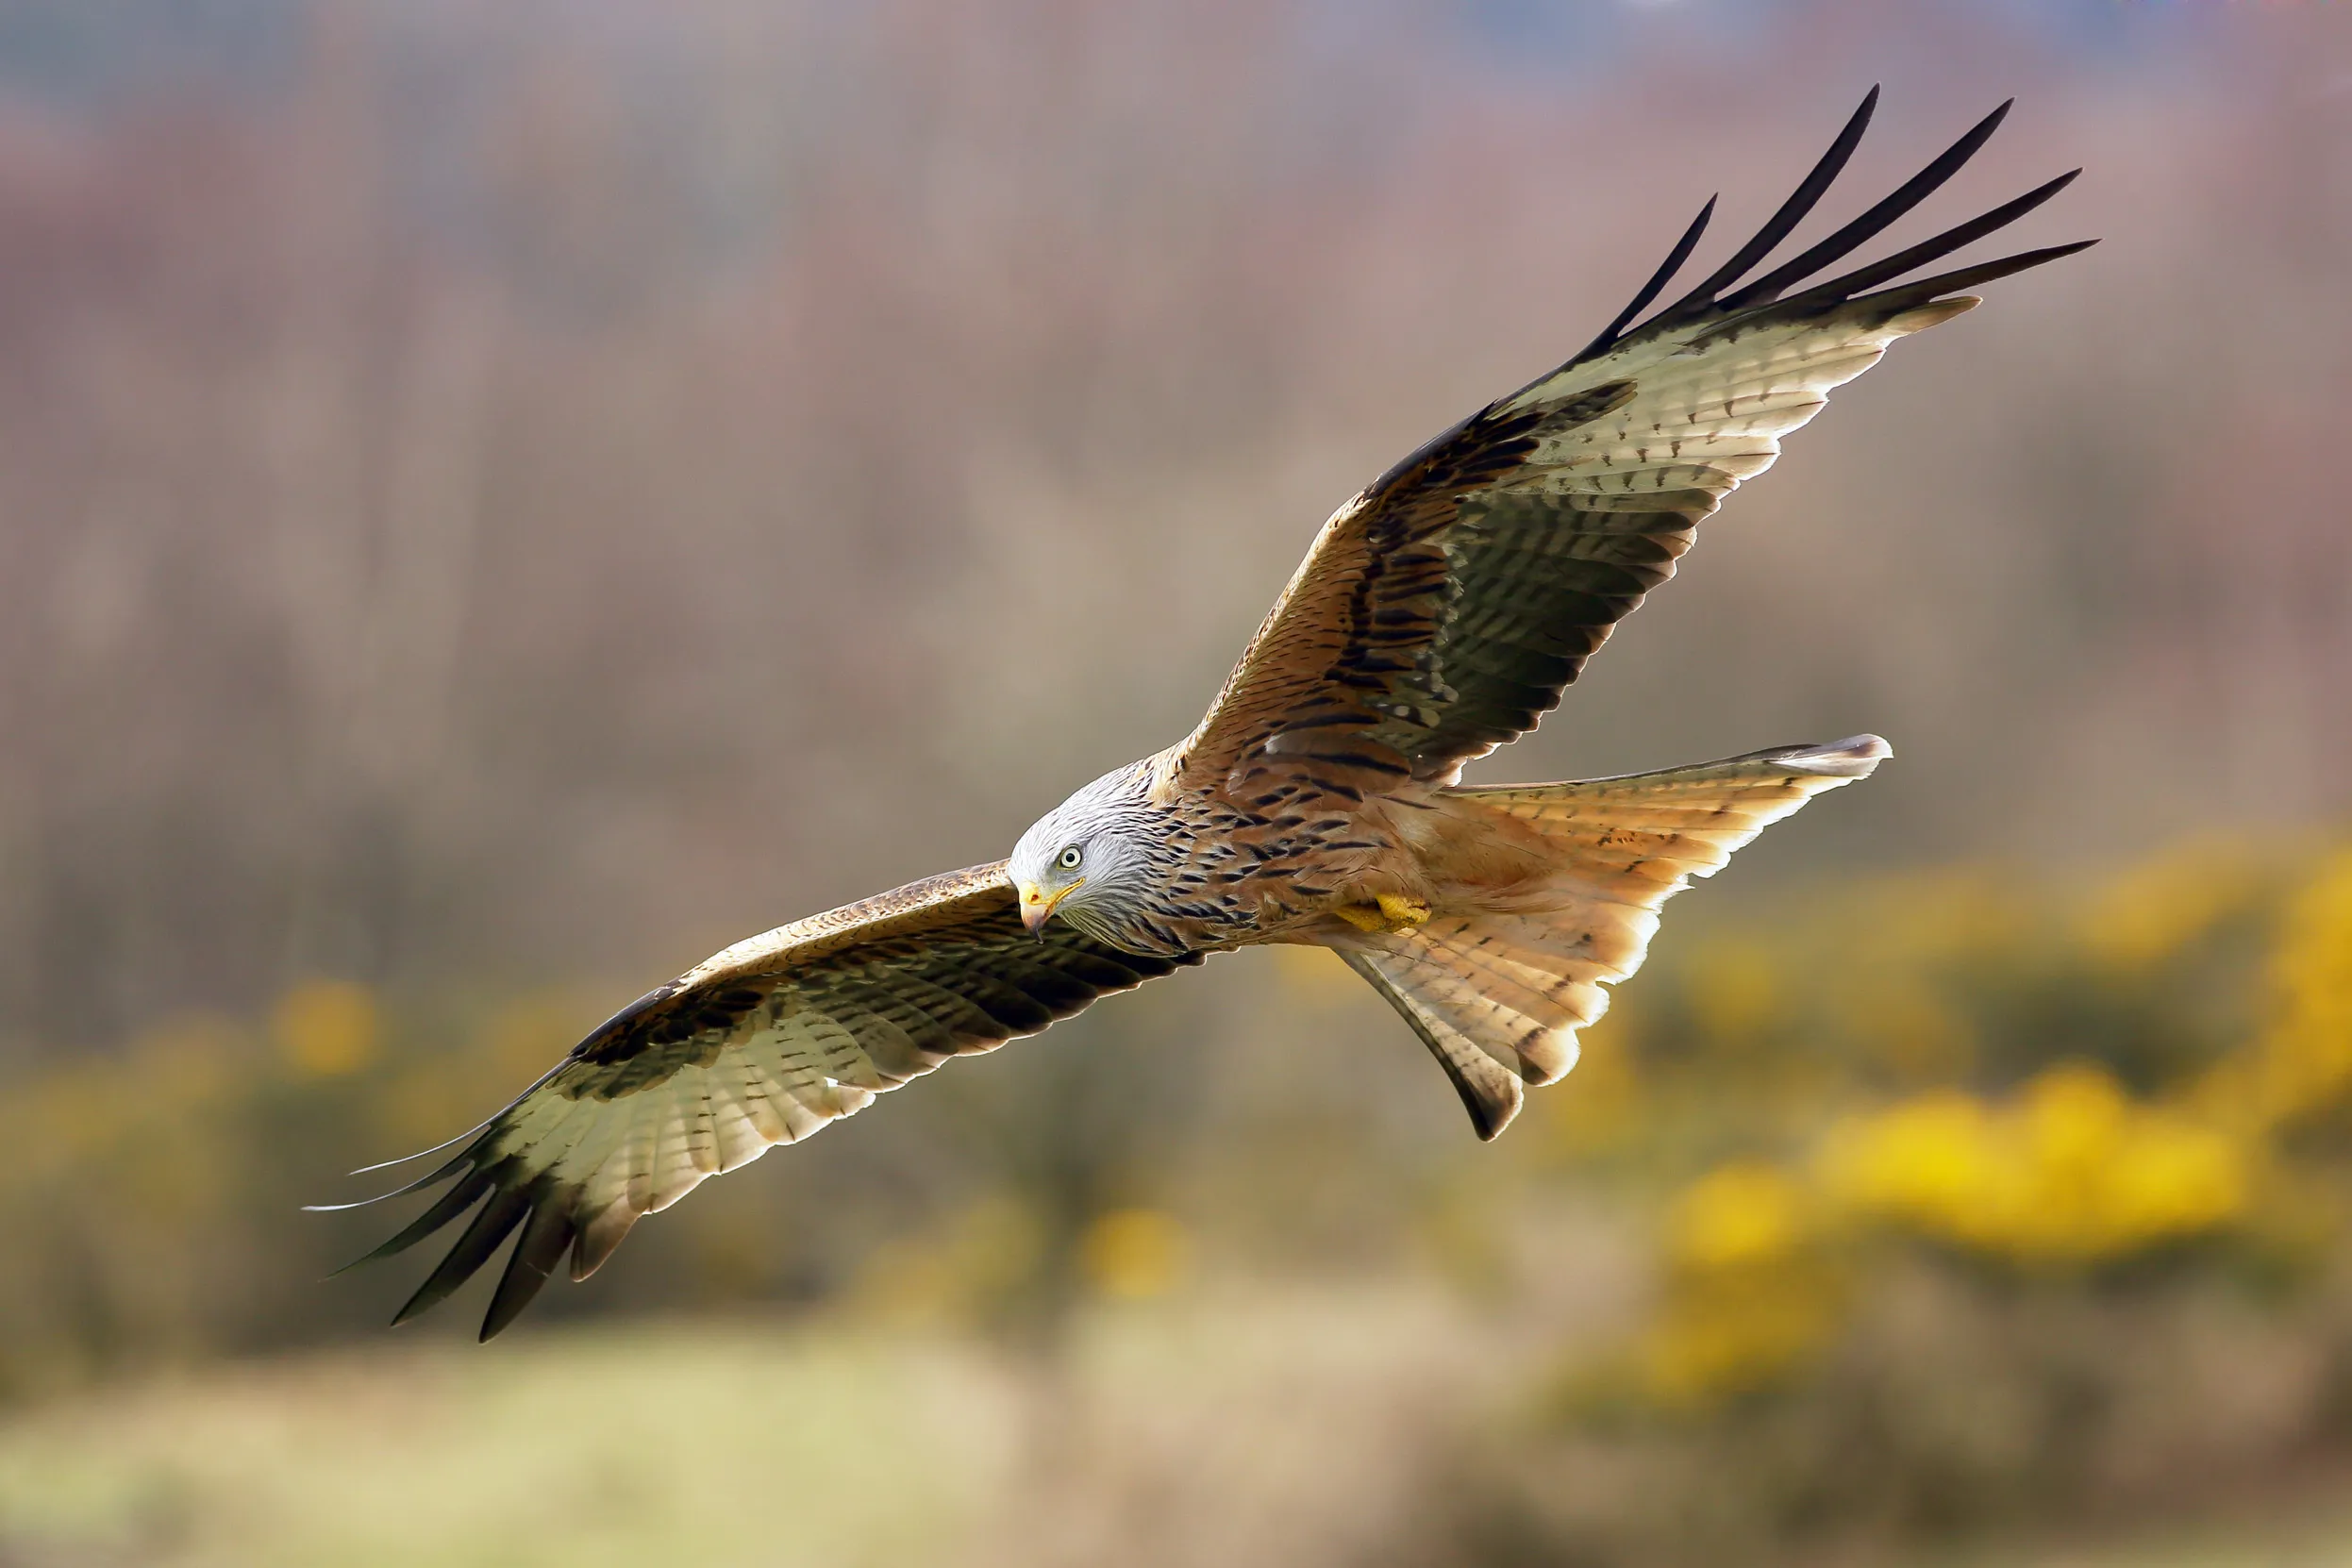 Red Kite in flight over a meadow.